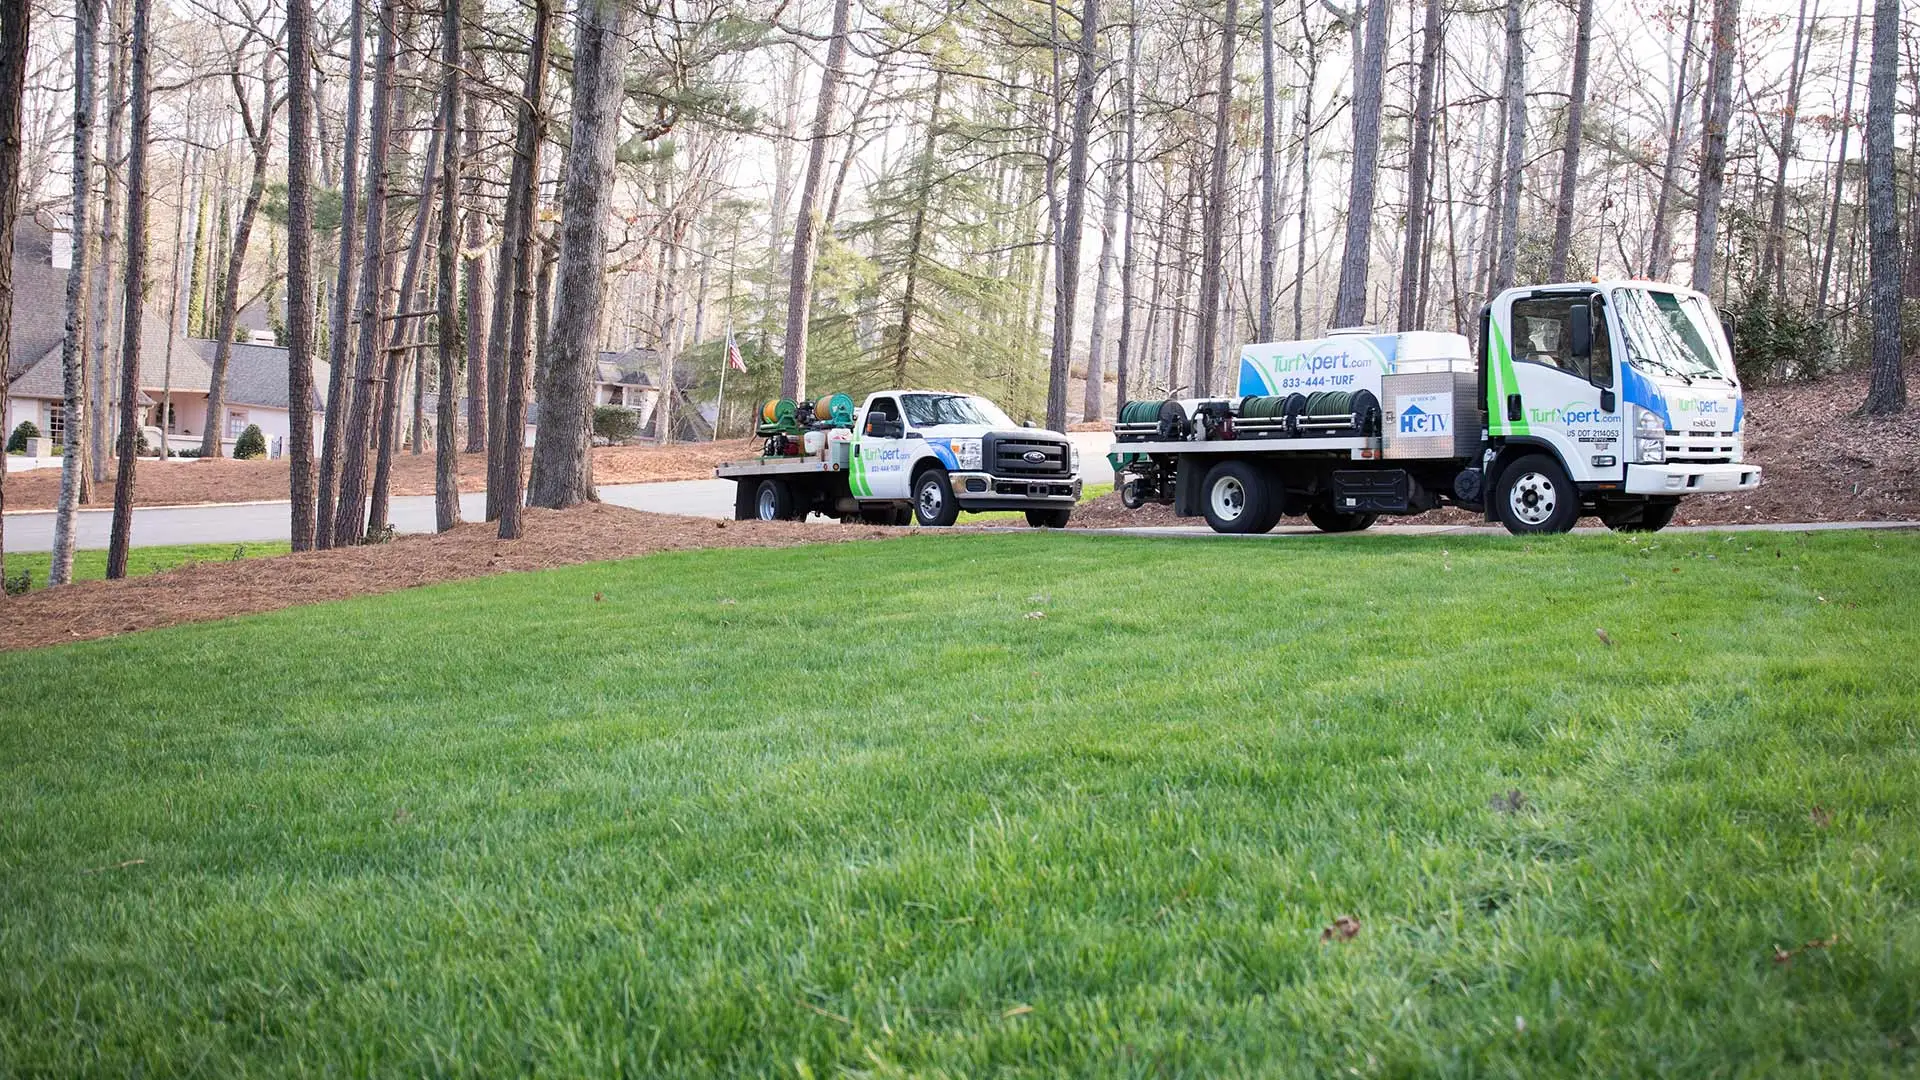 TurfXpert work vehicles arriving to perform lawn care treatments in Kennesaw, GA.